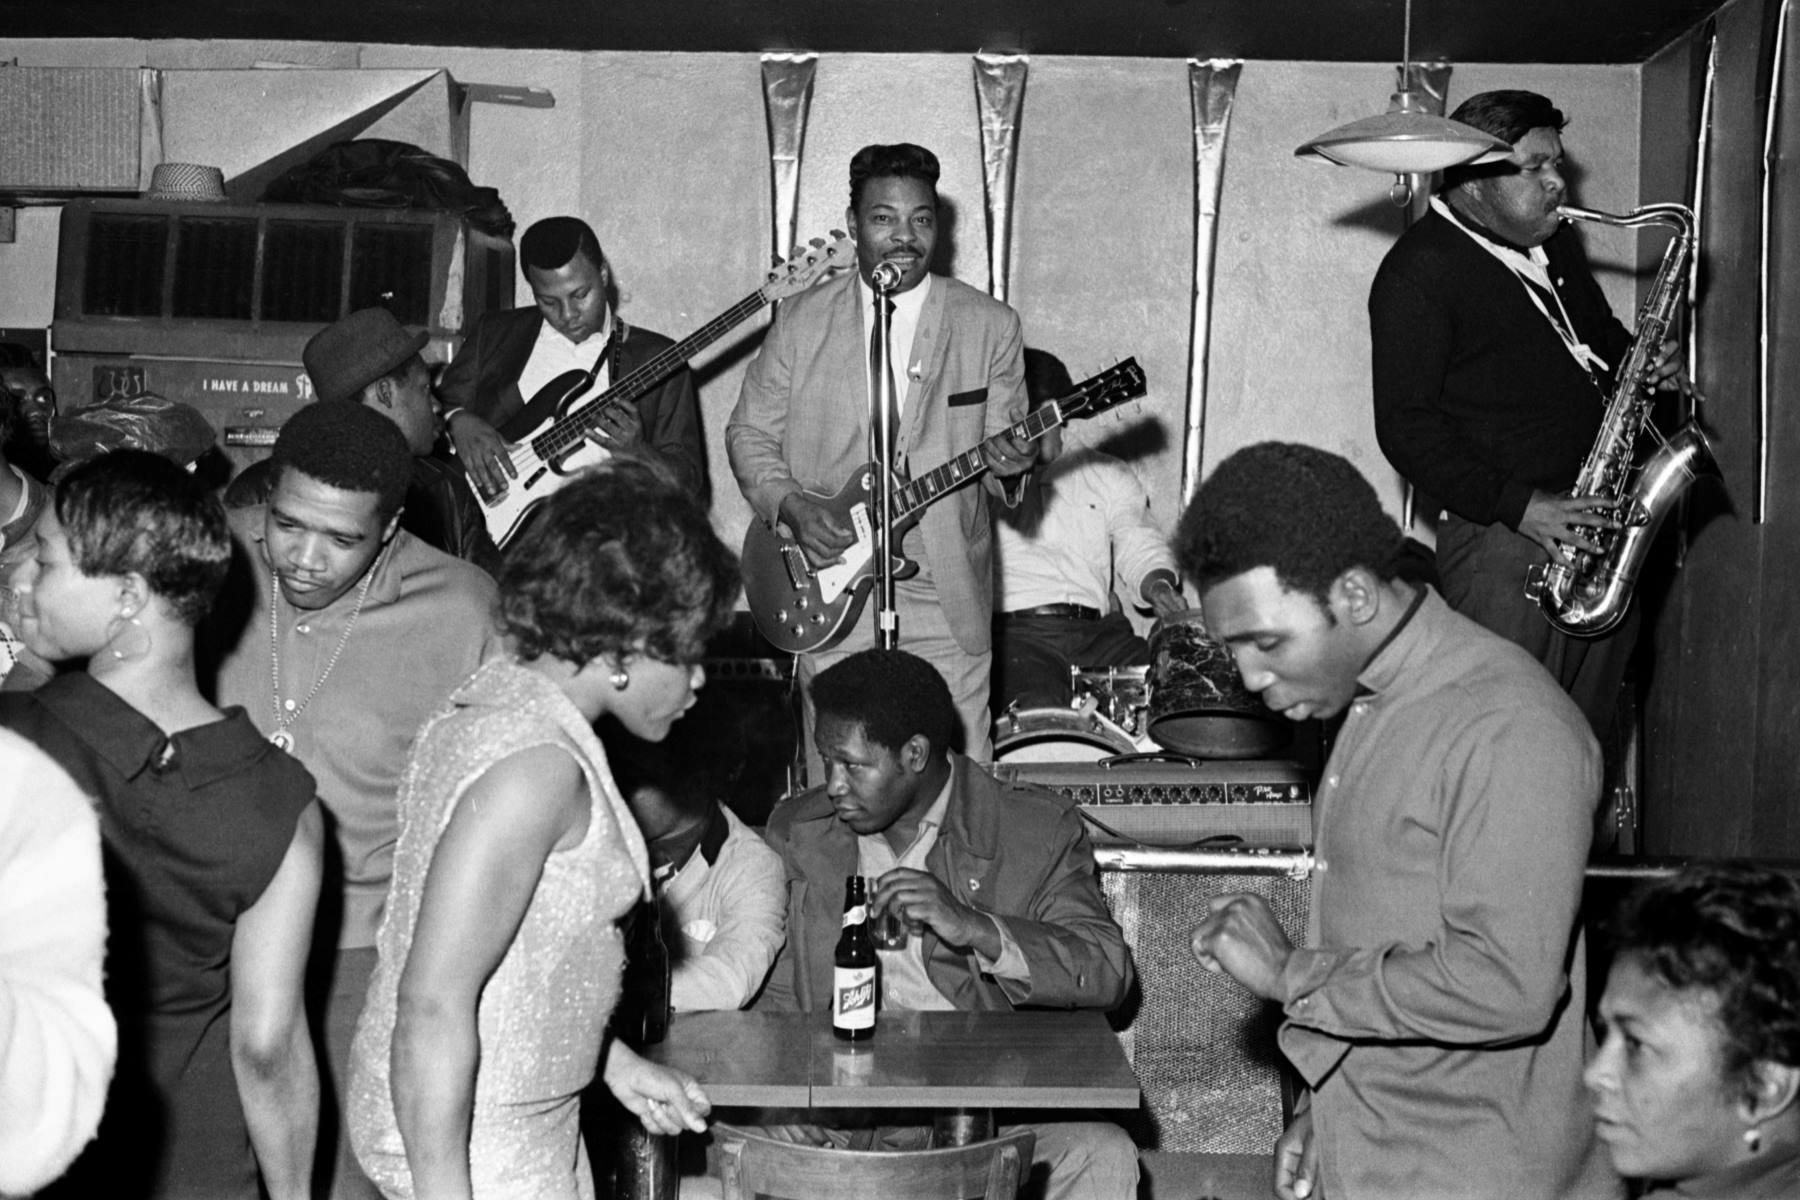 What Effect Did The Great Migration Have On The Popularity Of Jazz?